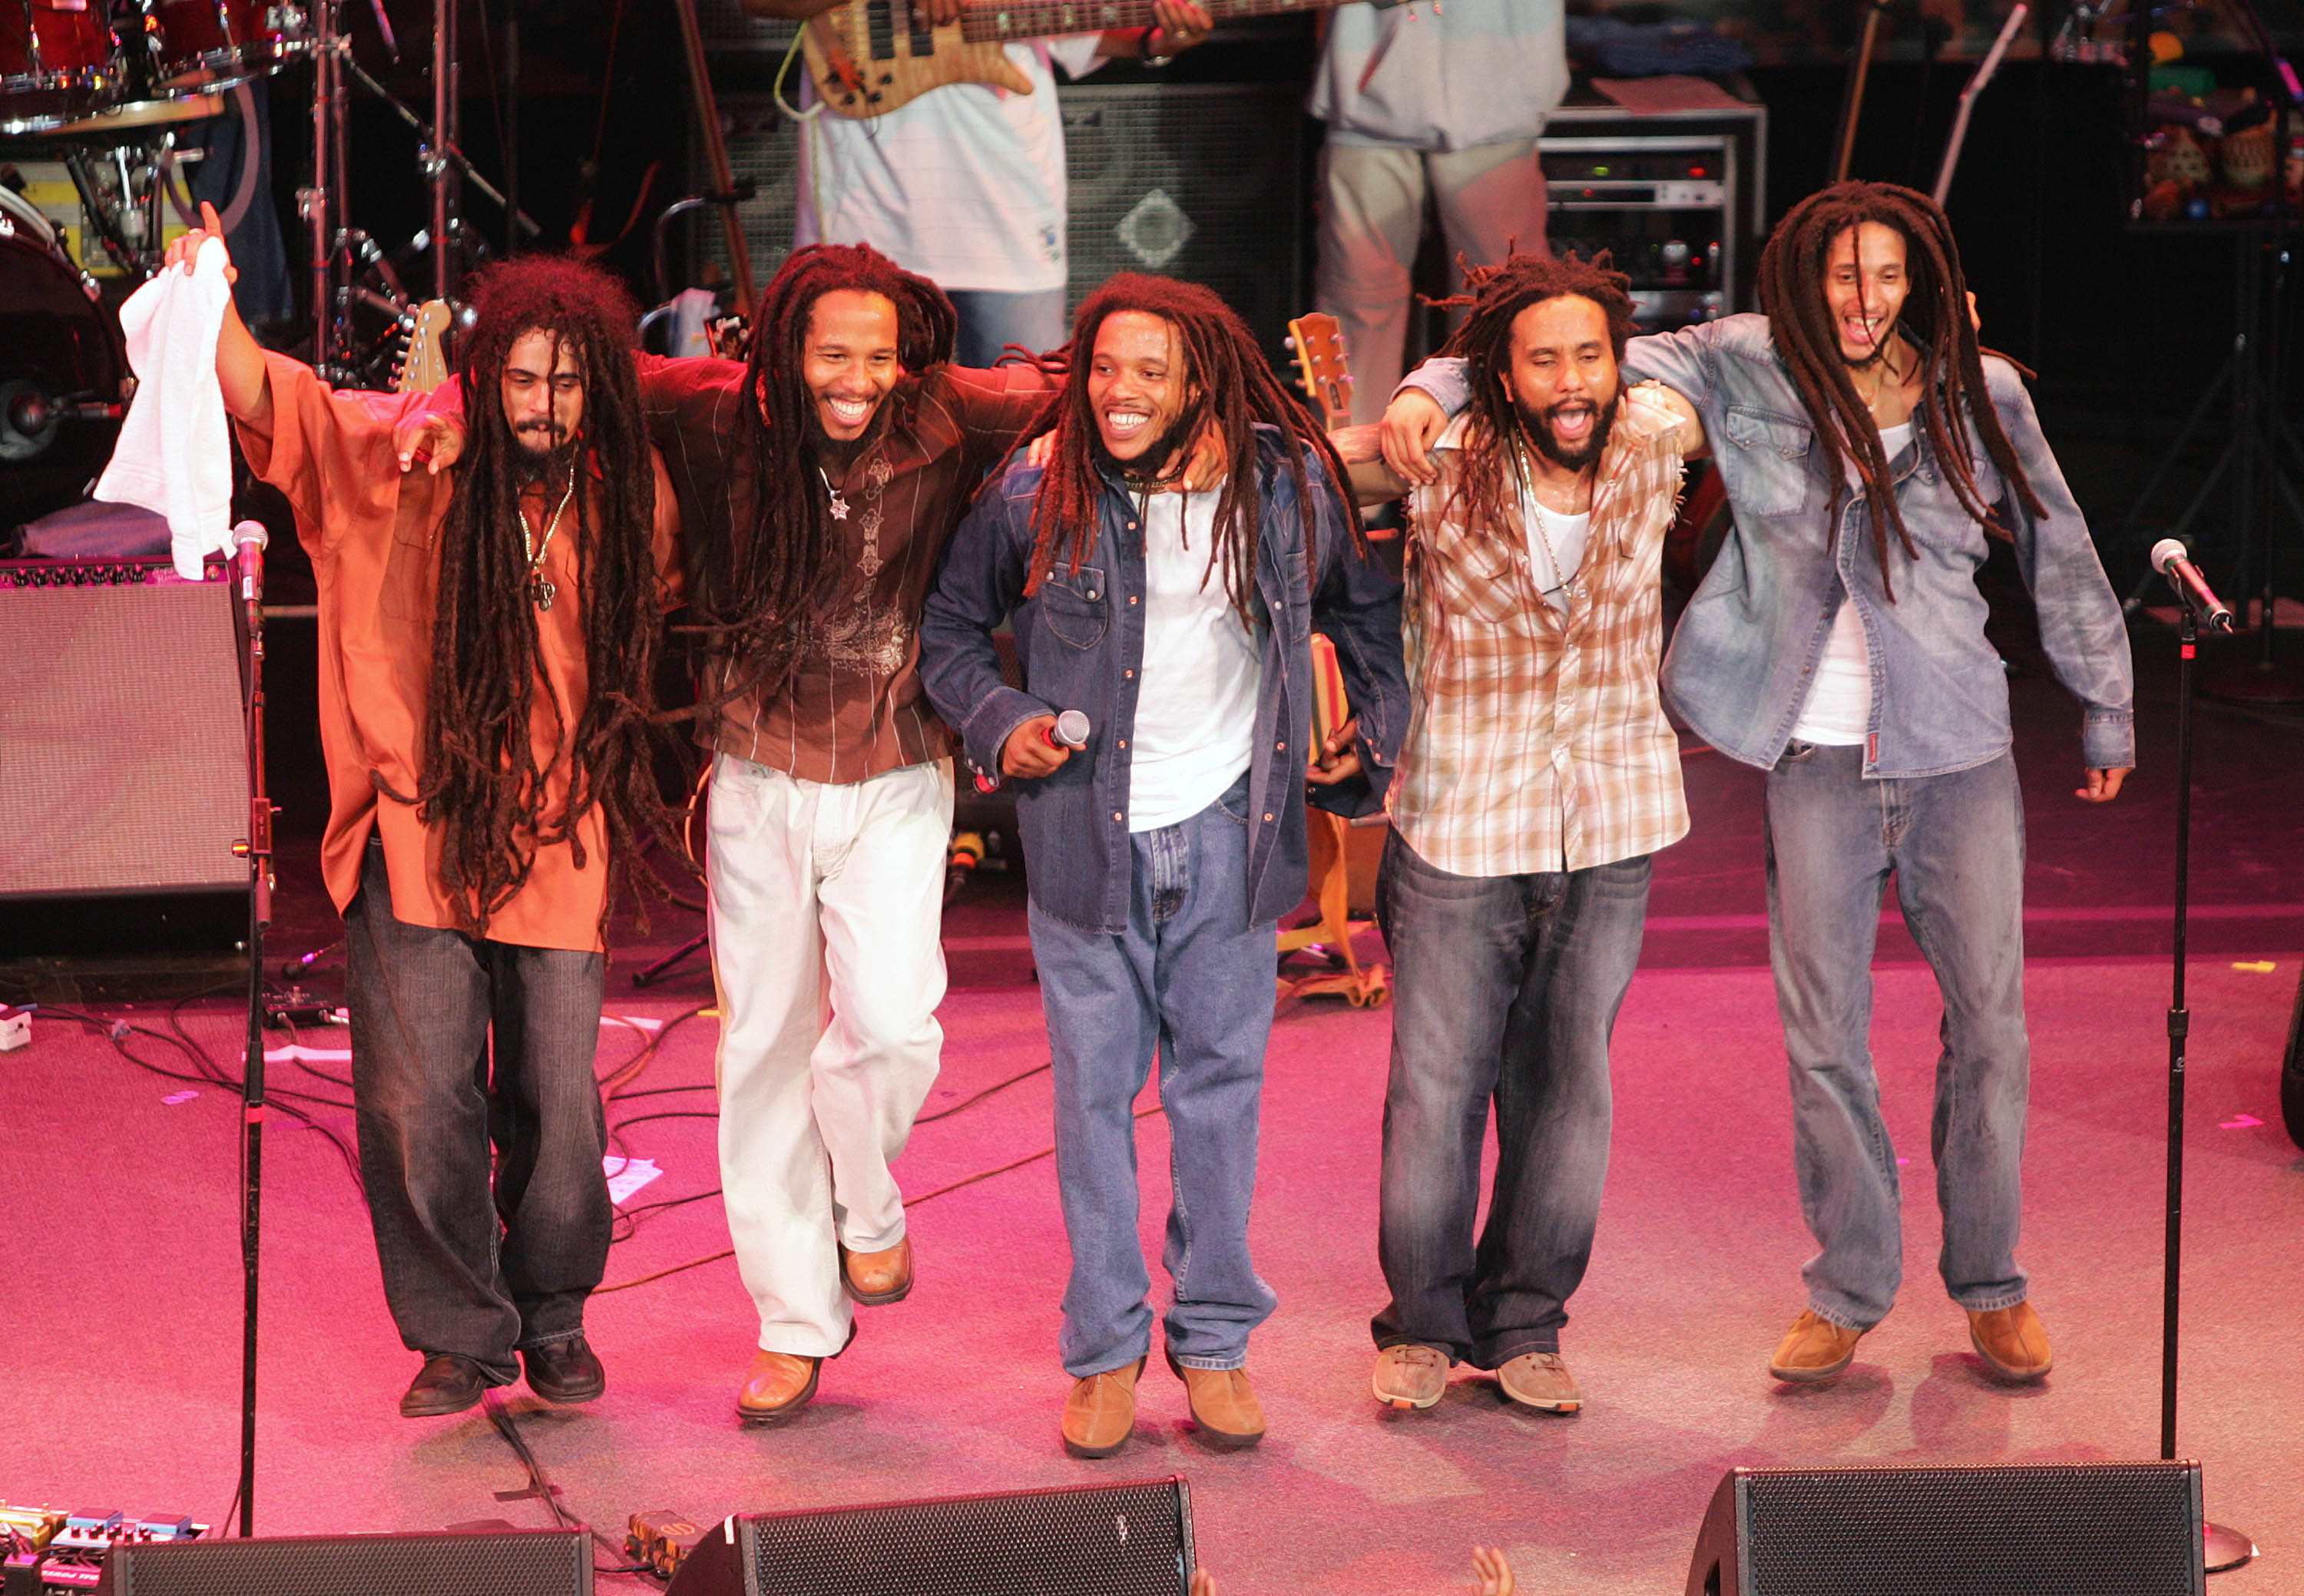 Damian Marley, Ziggy Marley, Stephen Marley, Kymani Marley, and Julian Marley onstage at the "Roots, Rock, Reggae Tour 2004" on August 8, 2004 | Source: Getty Images